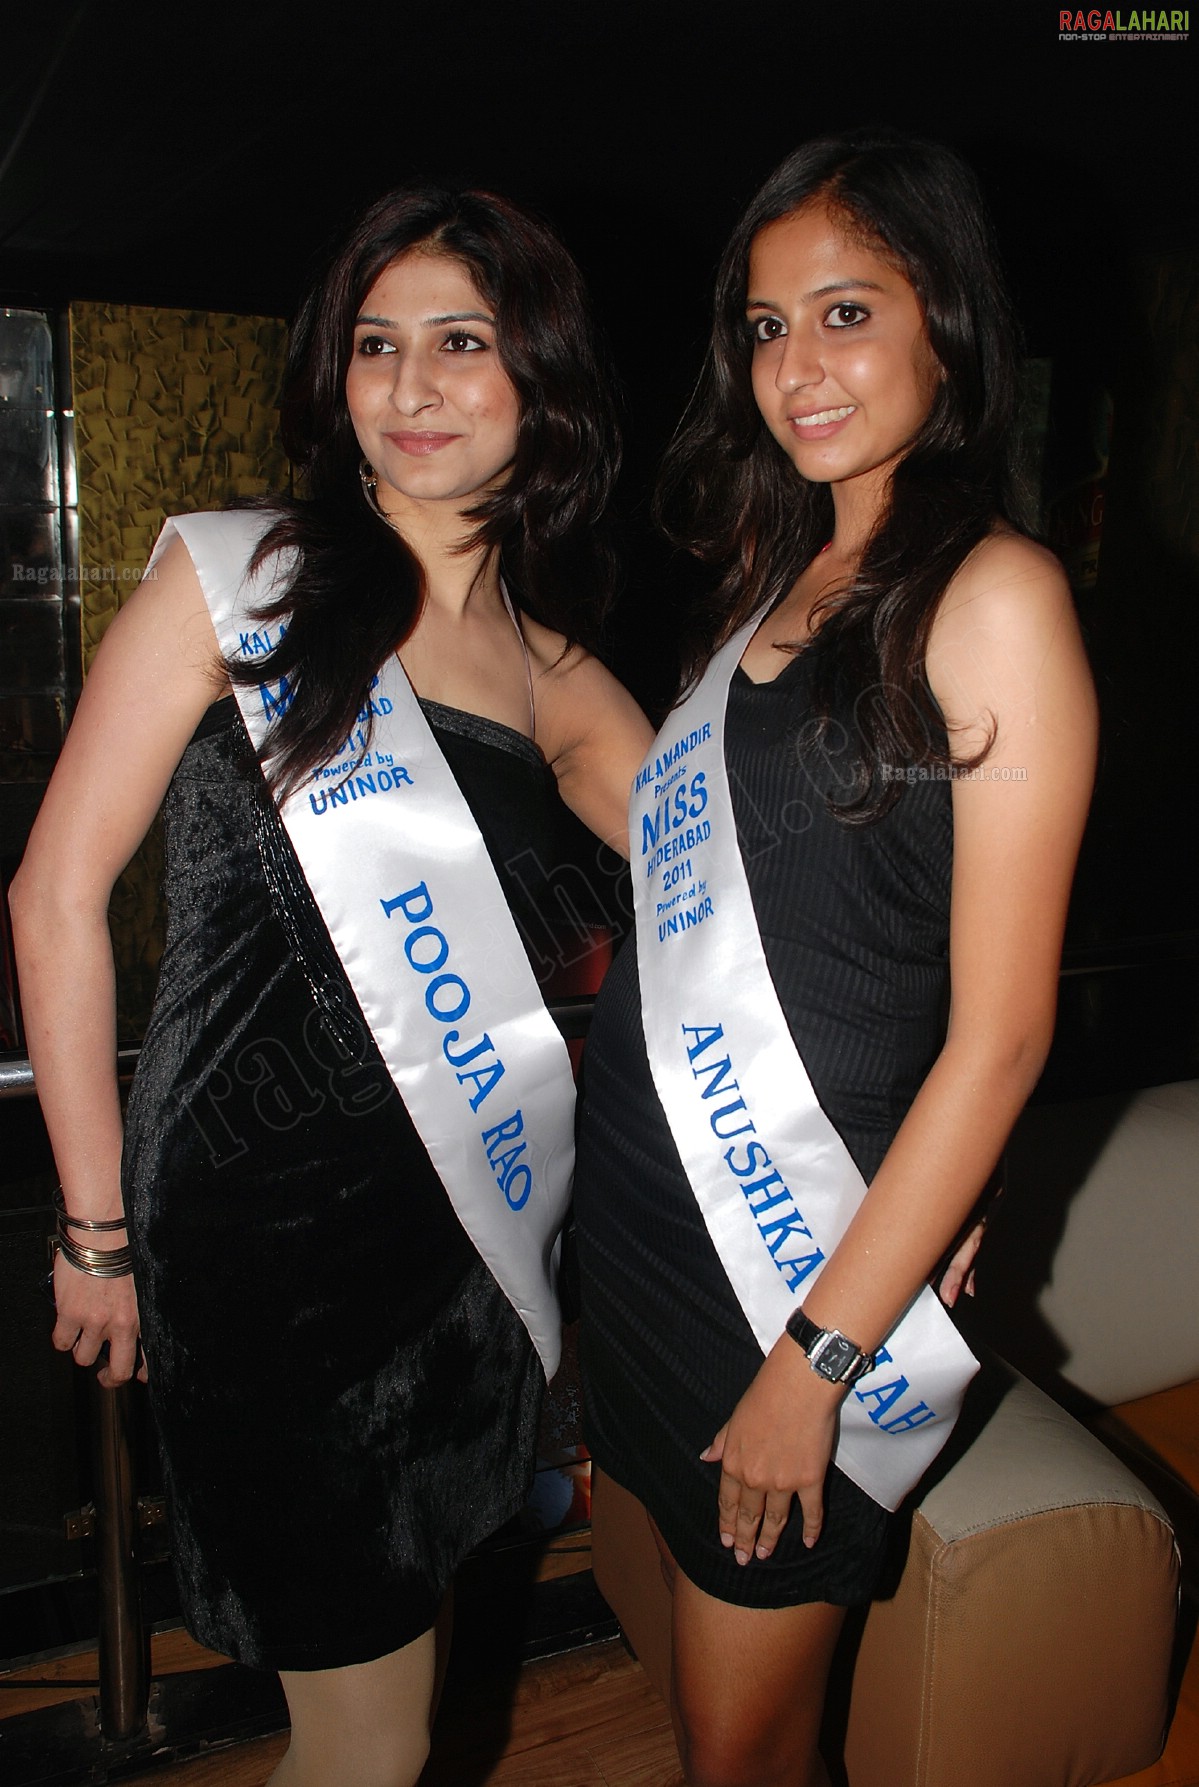 Page 3 Entertainments' Miss Hyderabad 2011 Pre-Event Party